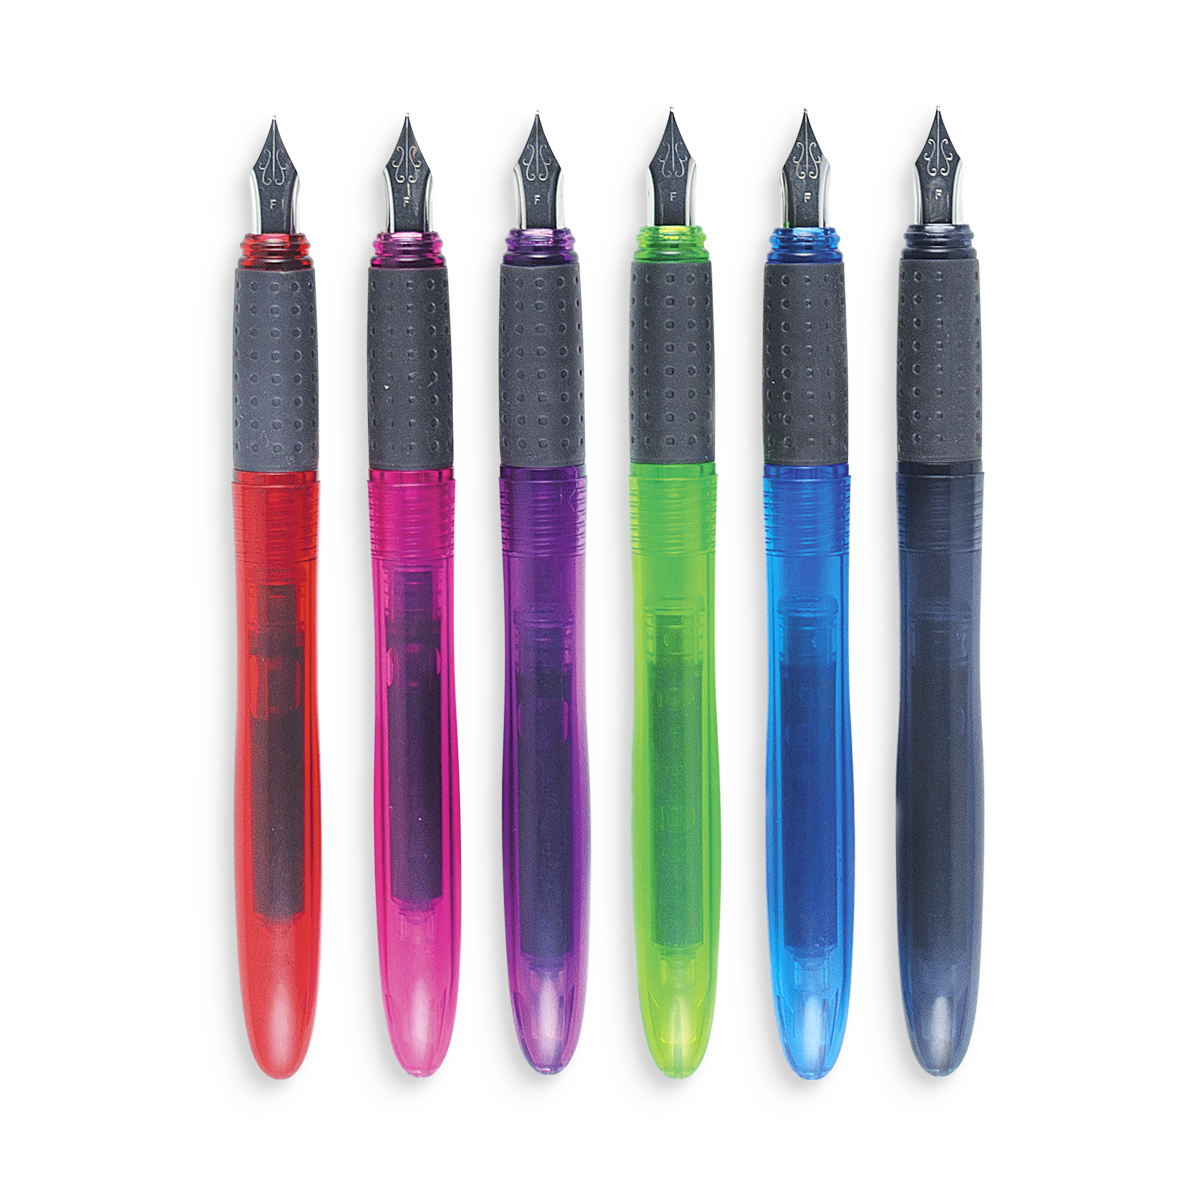 Ooly Writer's Duo Double-Ended Fountain Pens + Highlighters - Set of 3